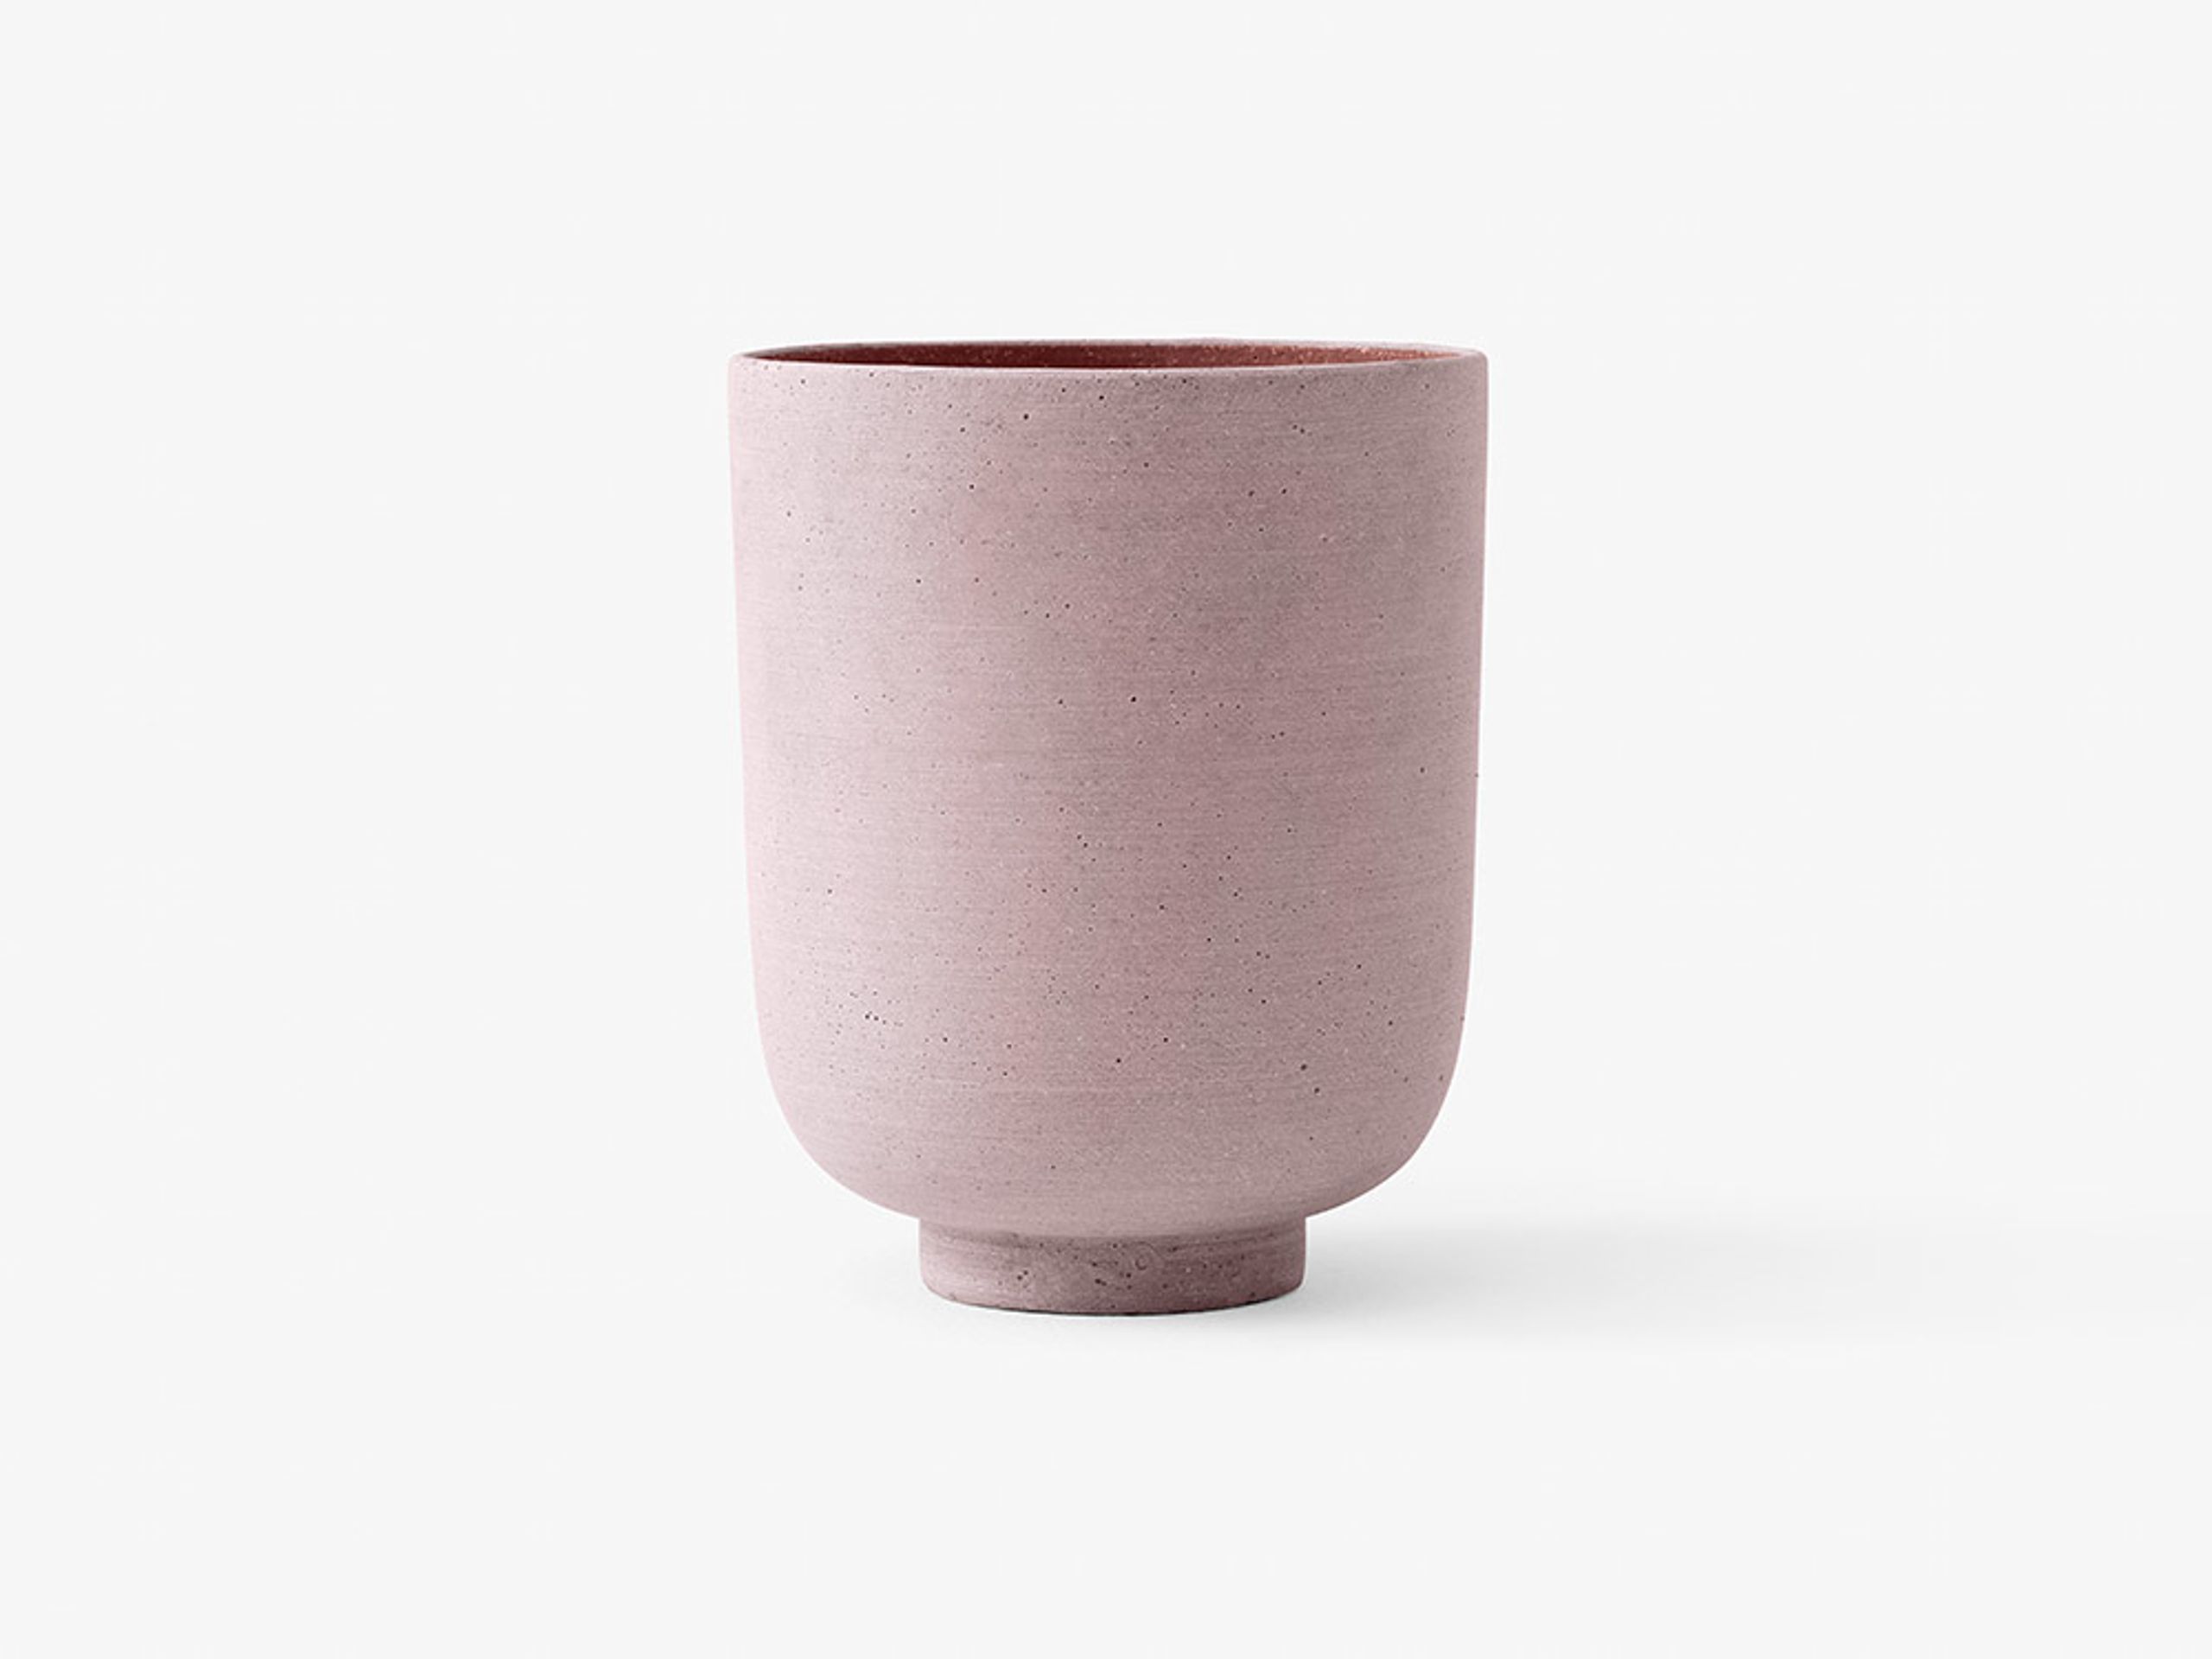 &tradition - Flowerpot - Collect - Planters SC72 - Sienna